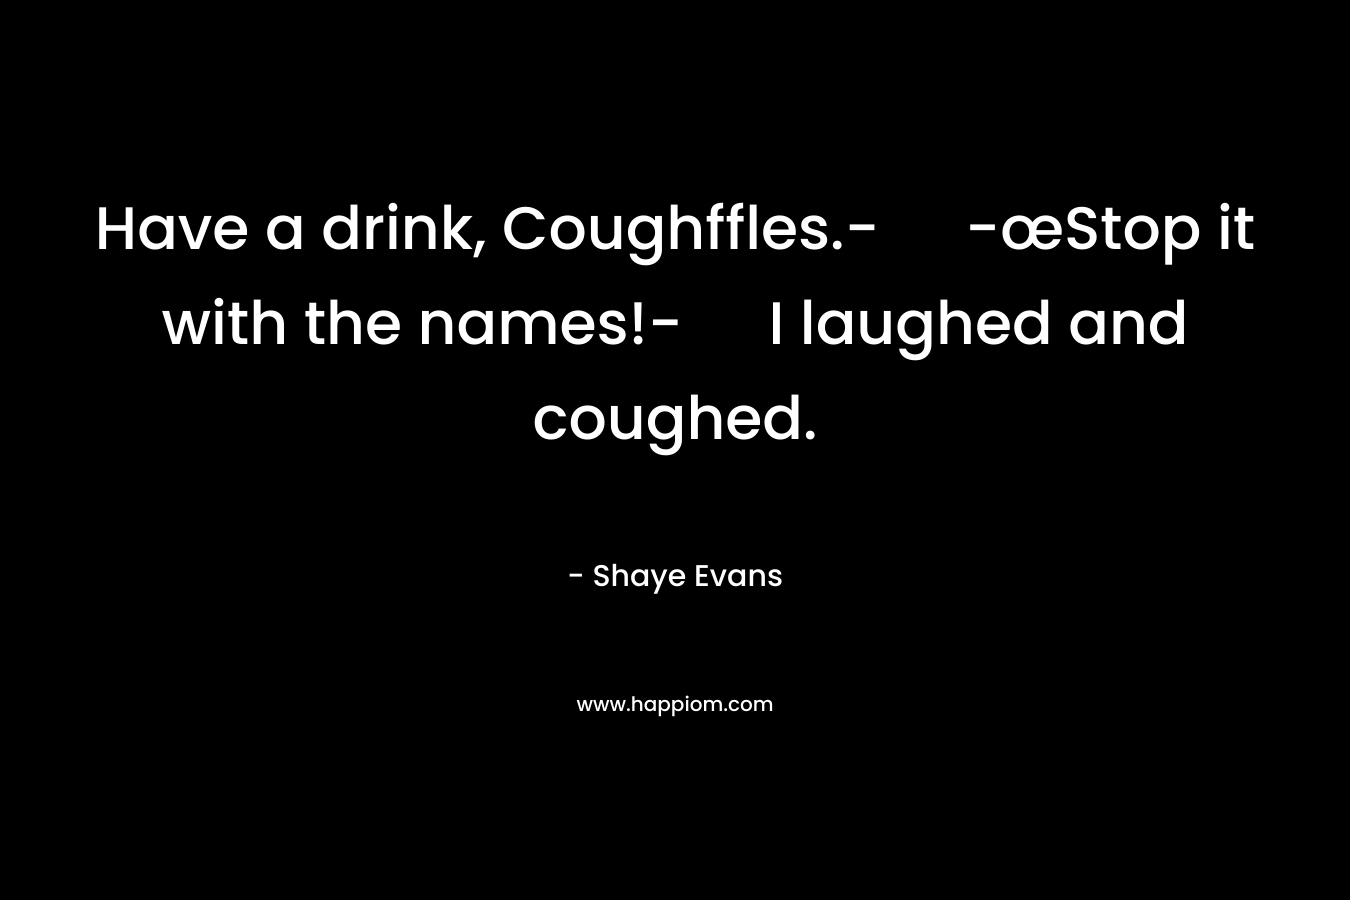 Have a drink, Coughffles.- -œStop it with the names!- I laughed and coughed.